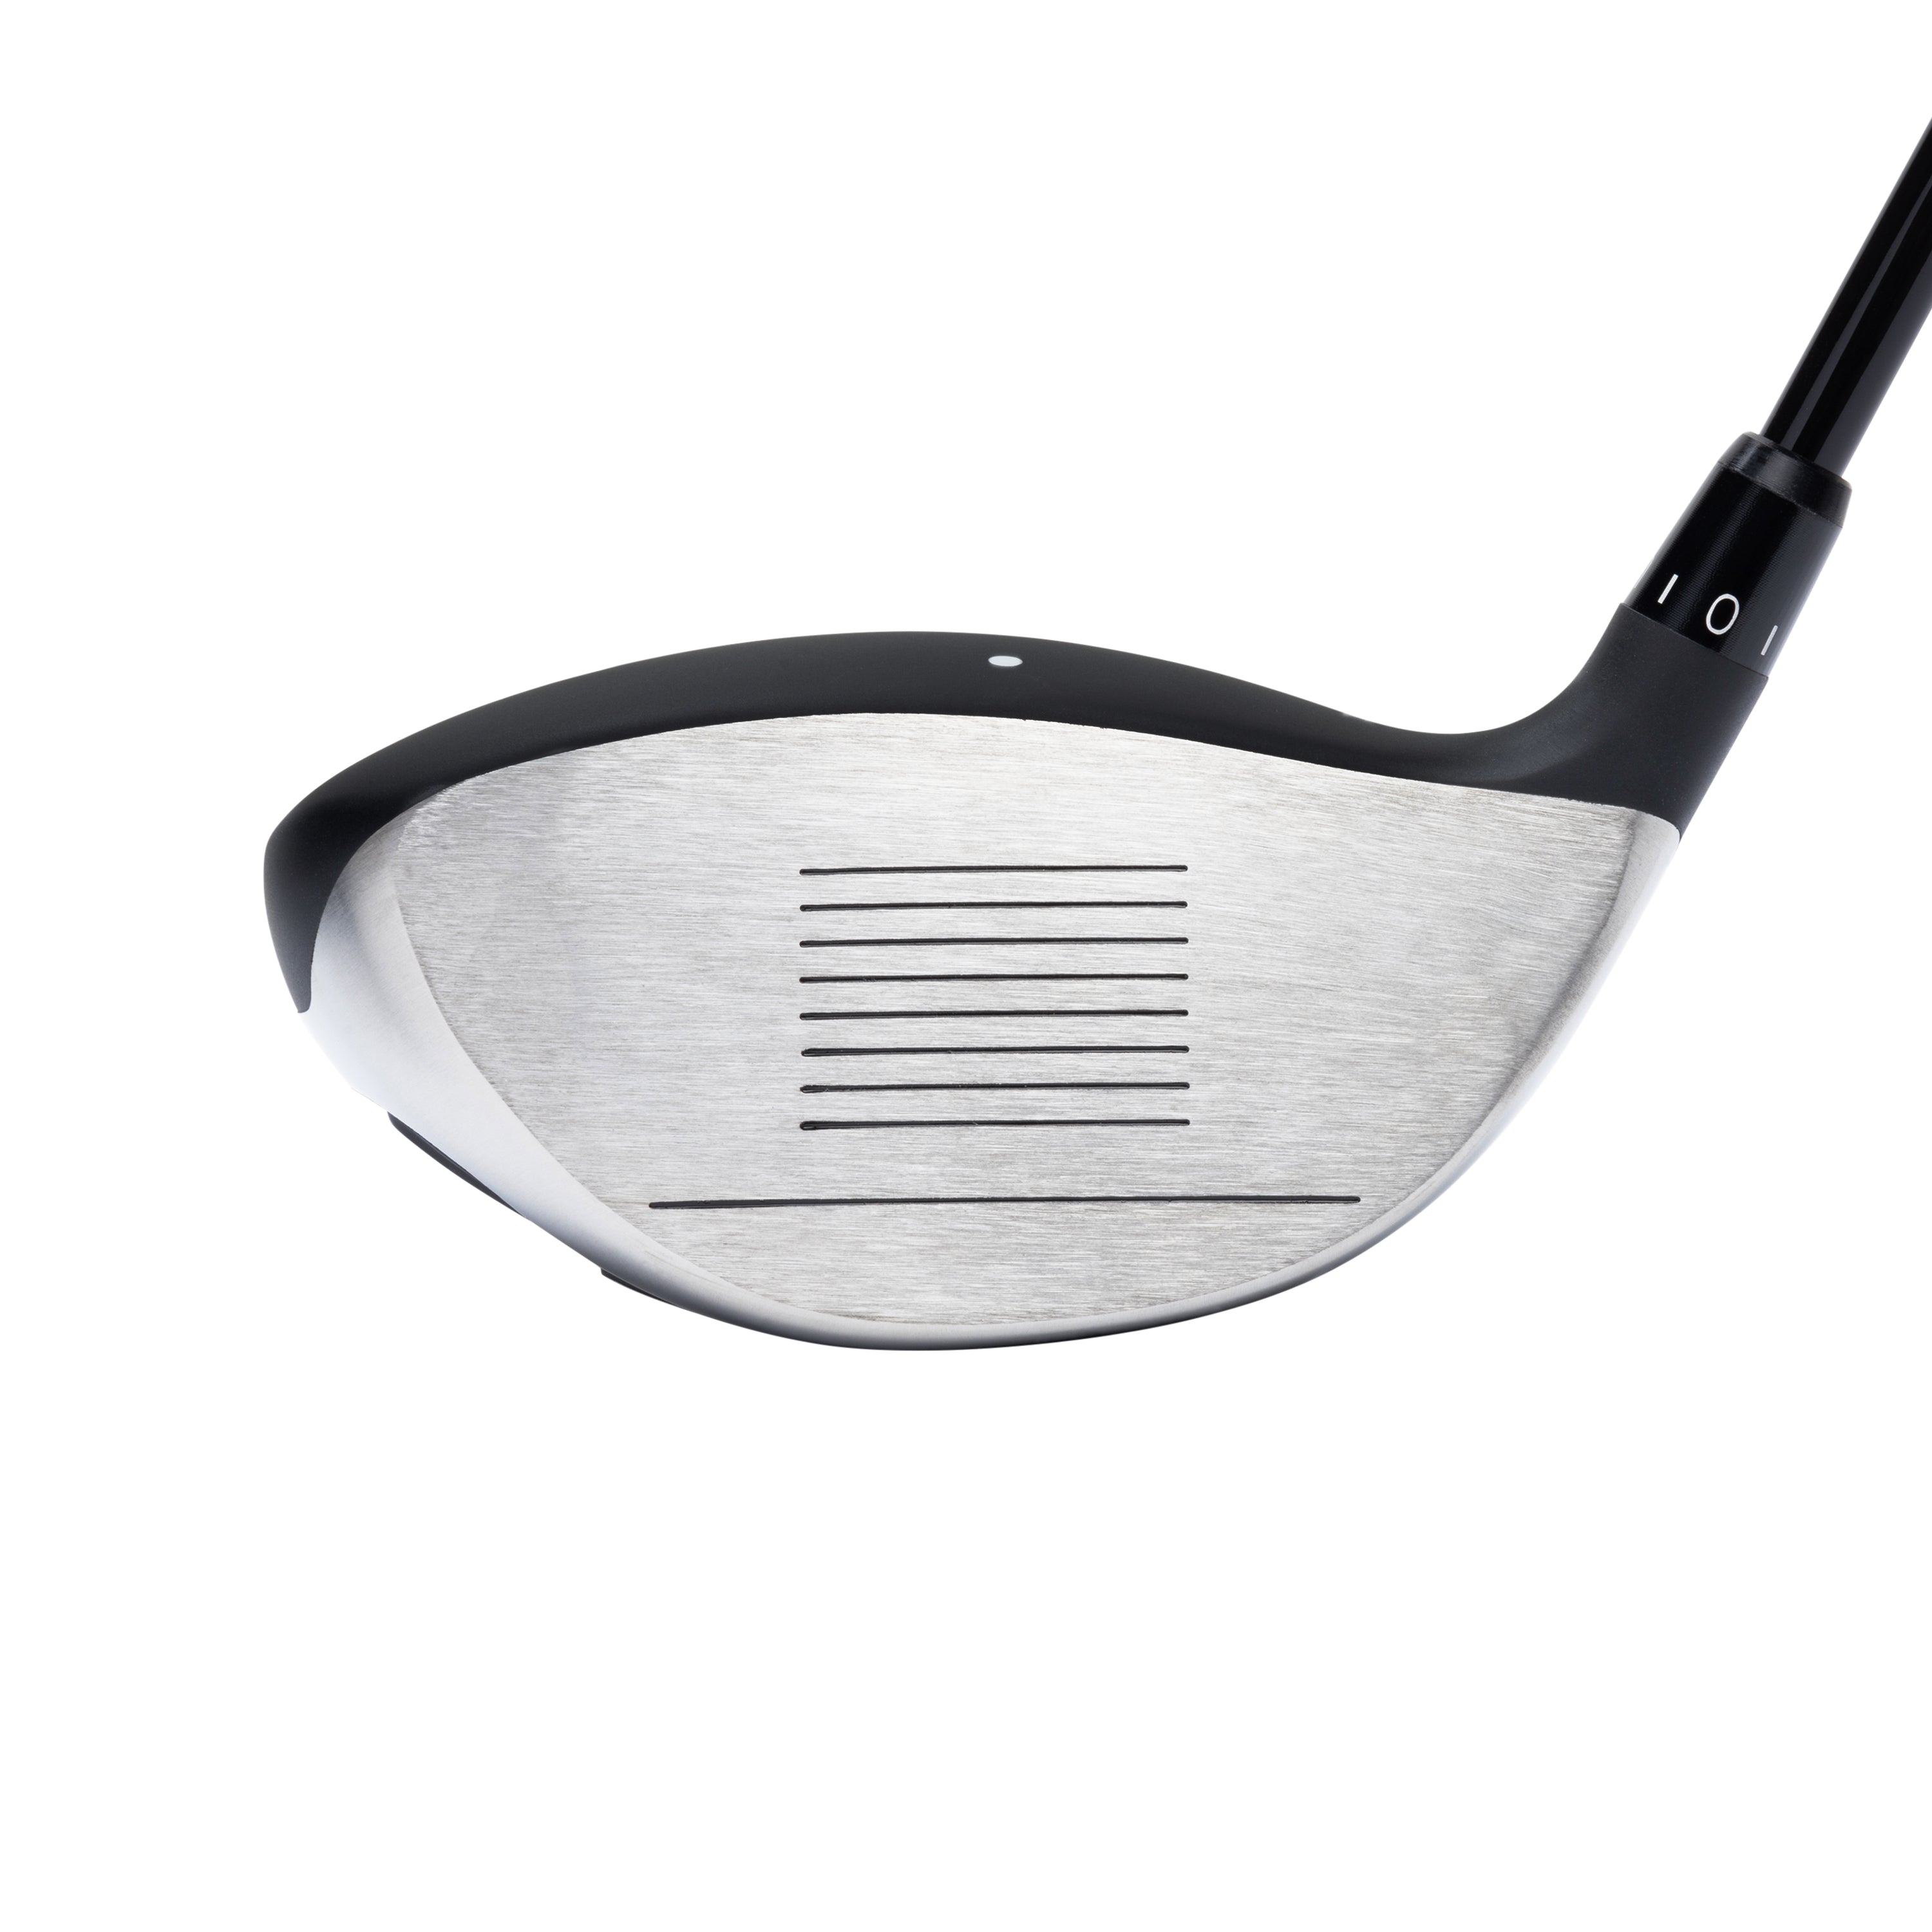 Custom Ultimate Distance Driver 16 (Men's Right Hand)